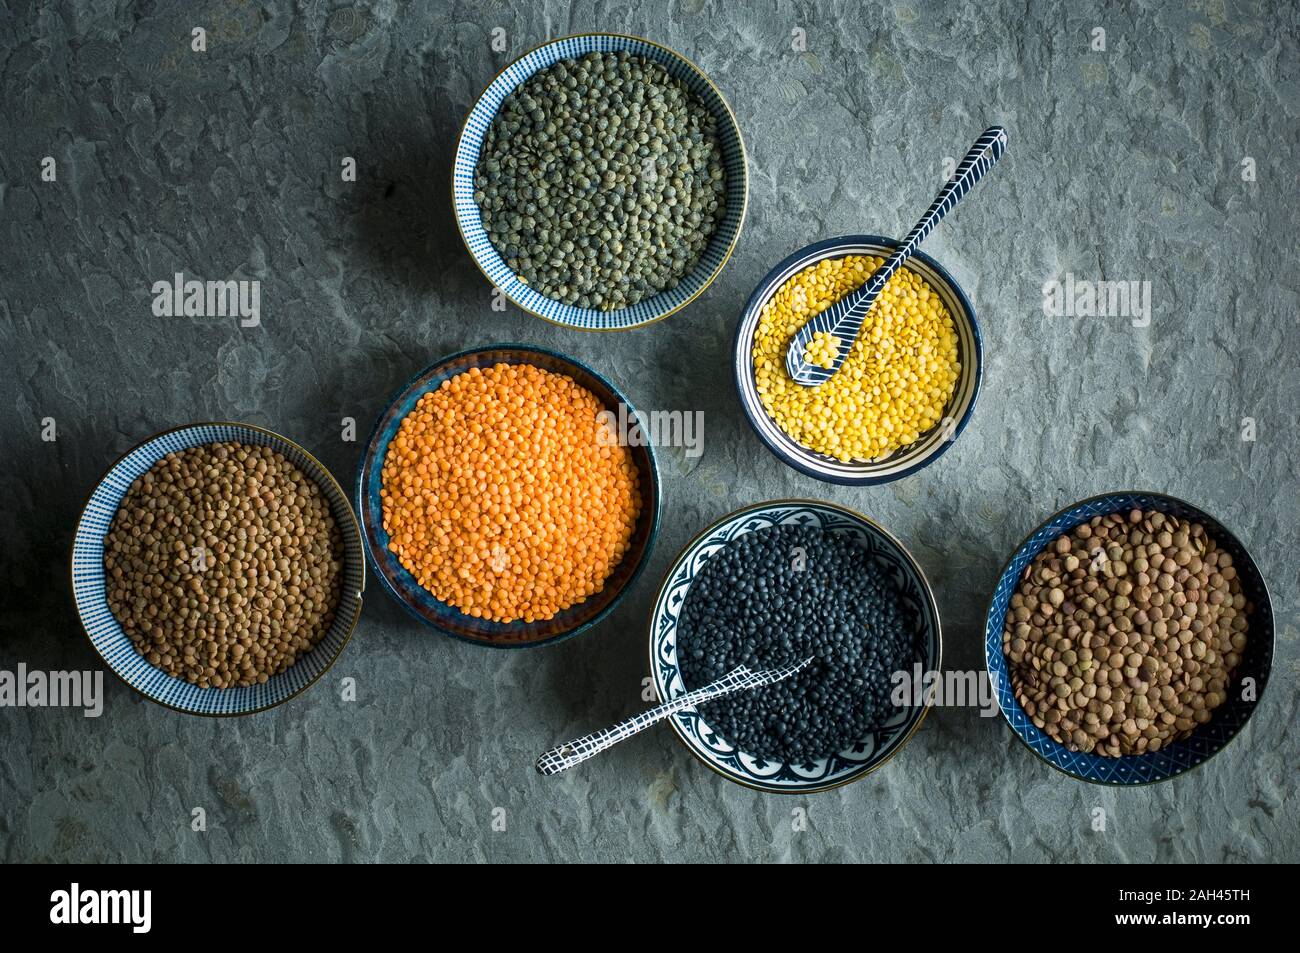 Bowls of colorful lentils Stock Photo